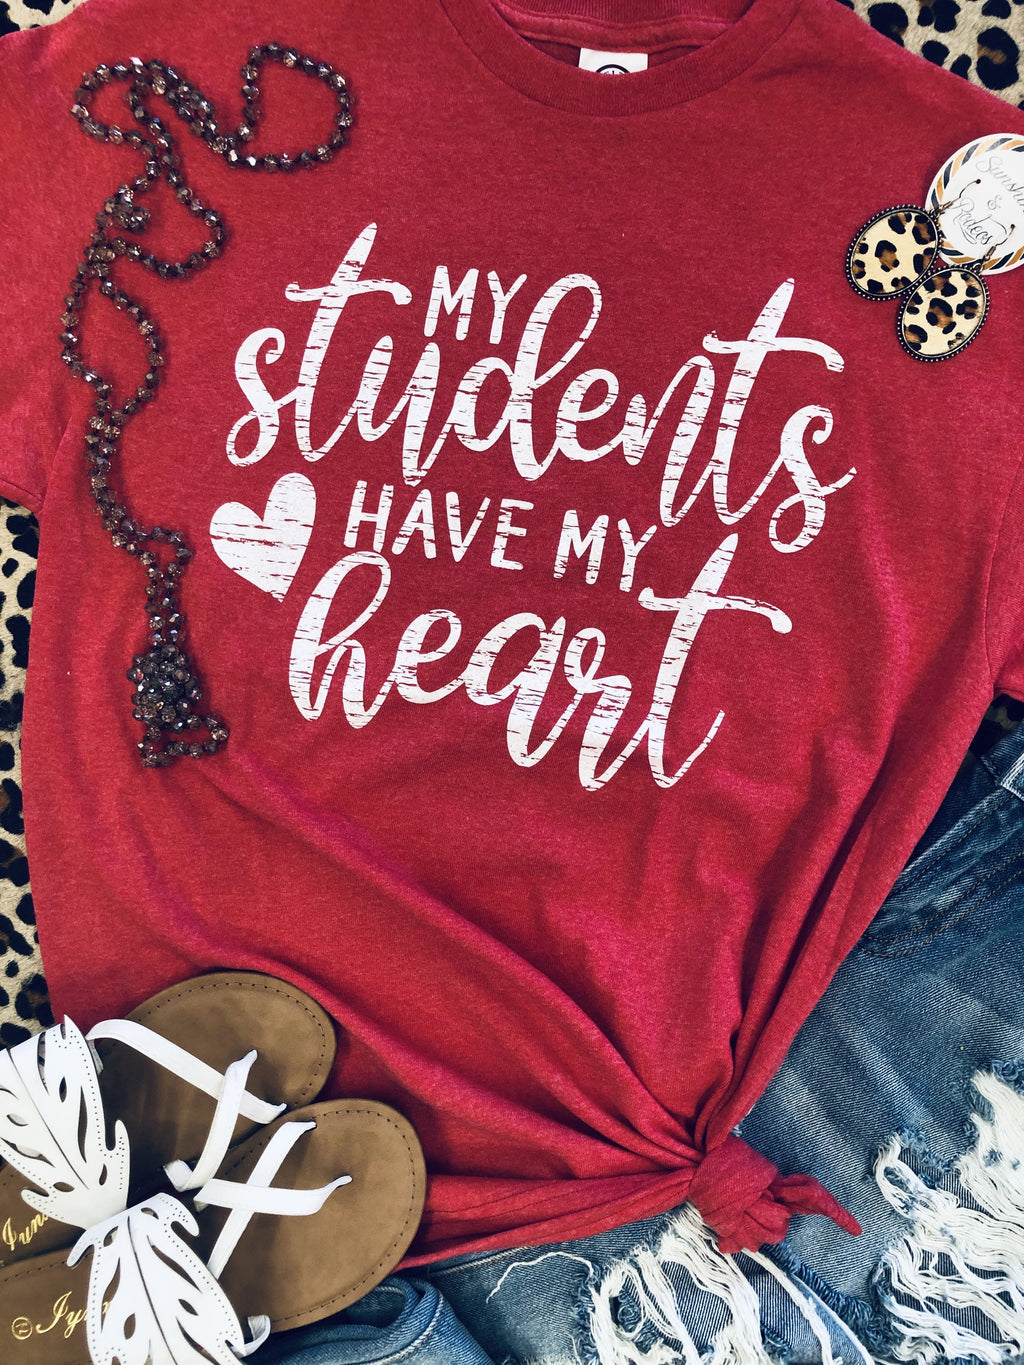 My students have my heart - Smarty Pants Boutique NH